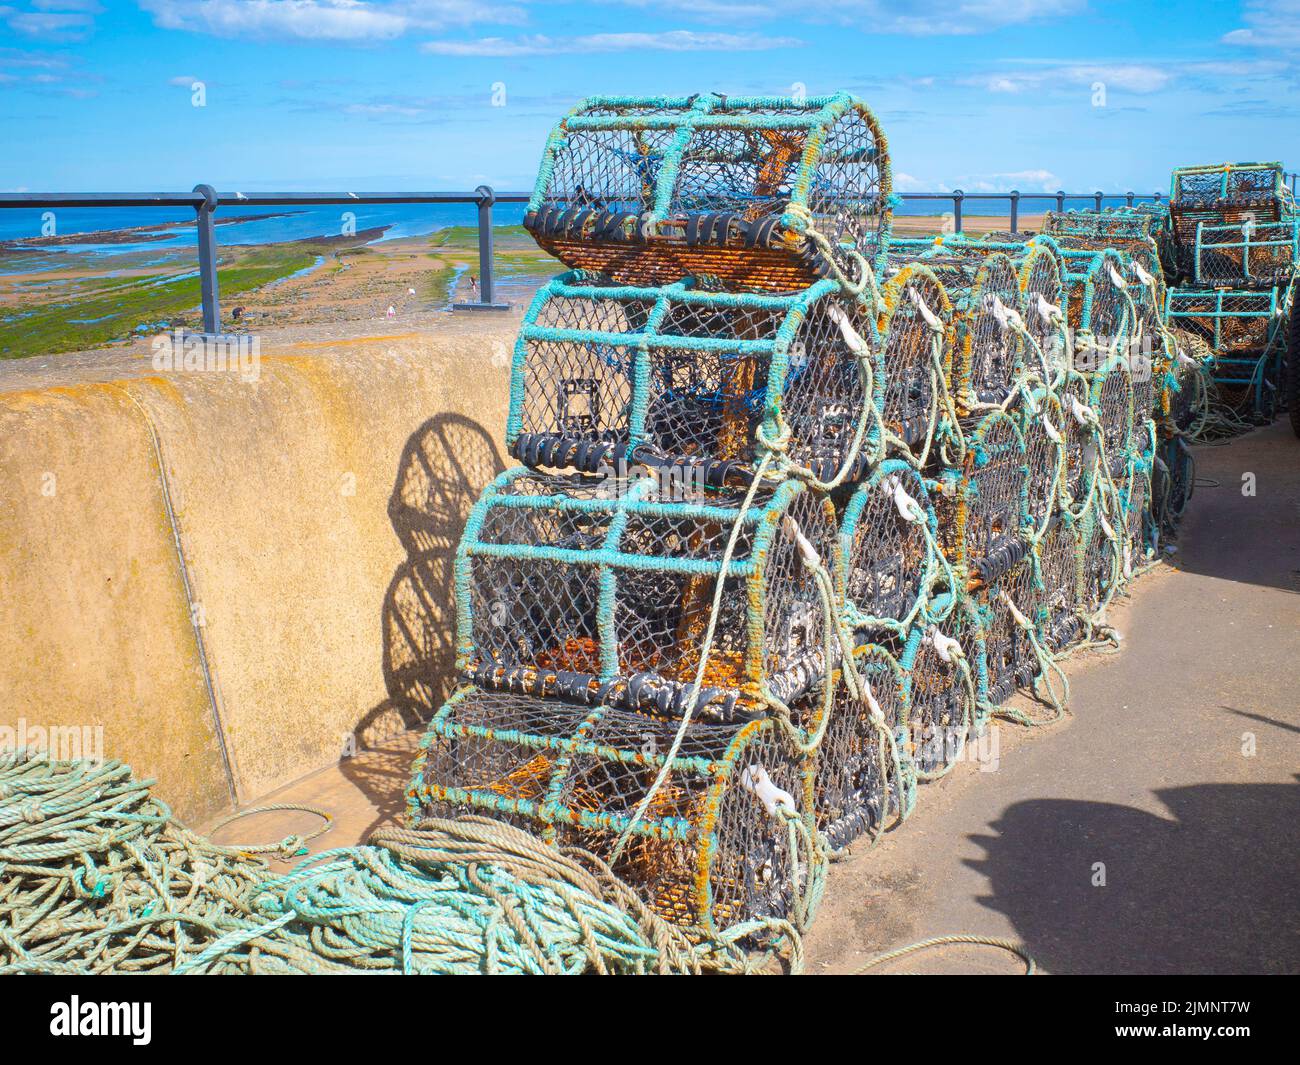 Lobster or crab pots stacked on the Esplanade where fishing boats are parked in Redcar North Yorkshire UK Stock Photo